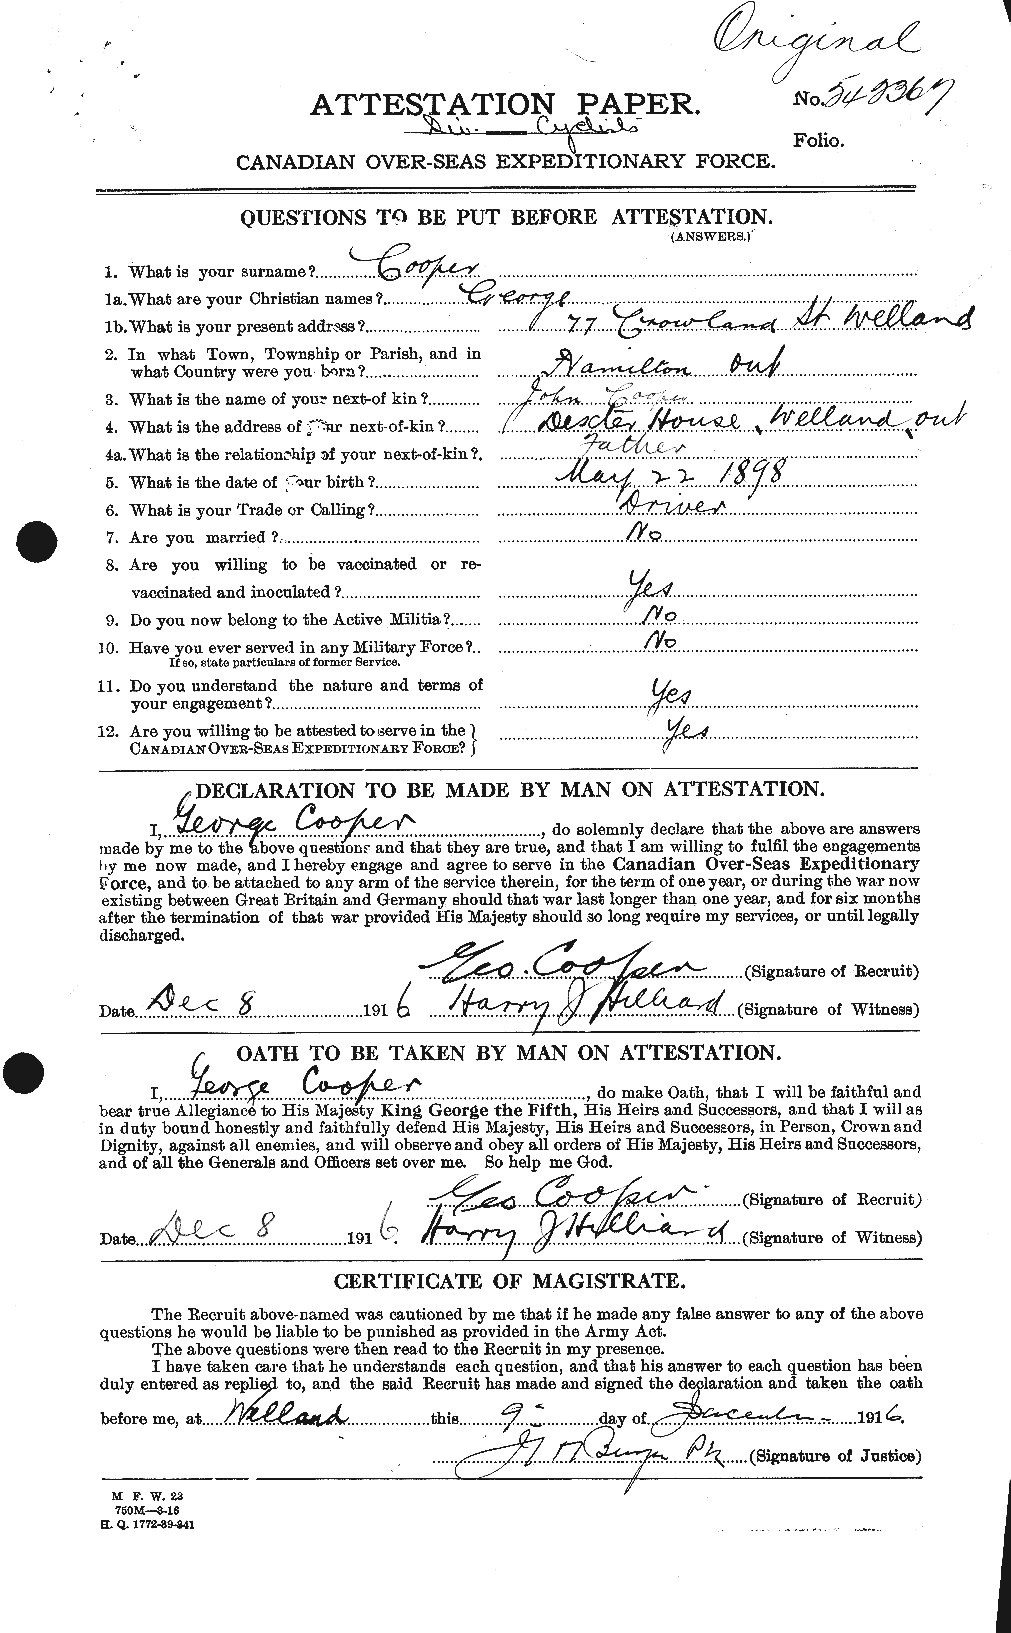 Personnel Records of the First World War - CEF 057796a